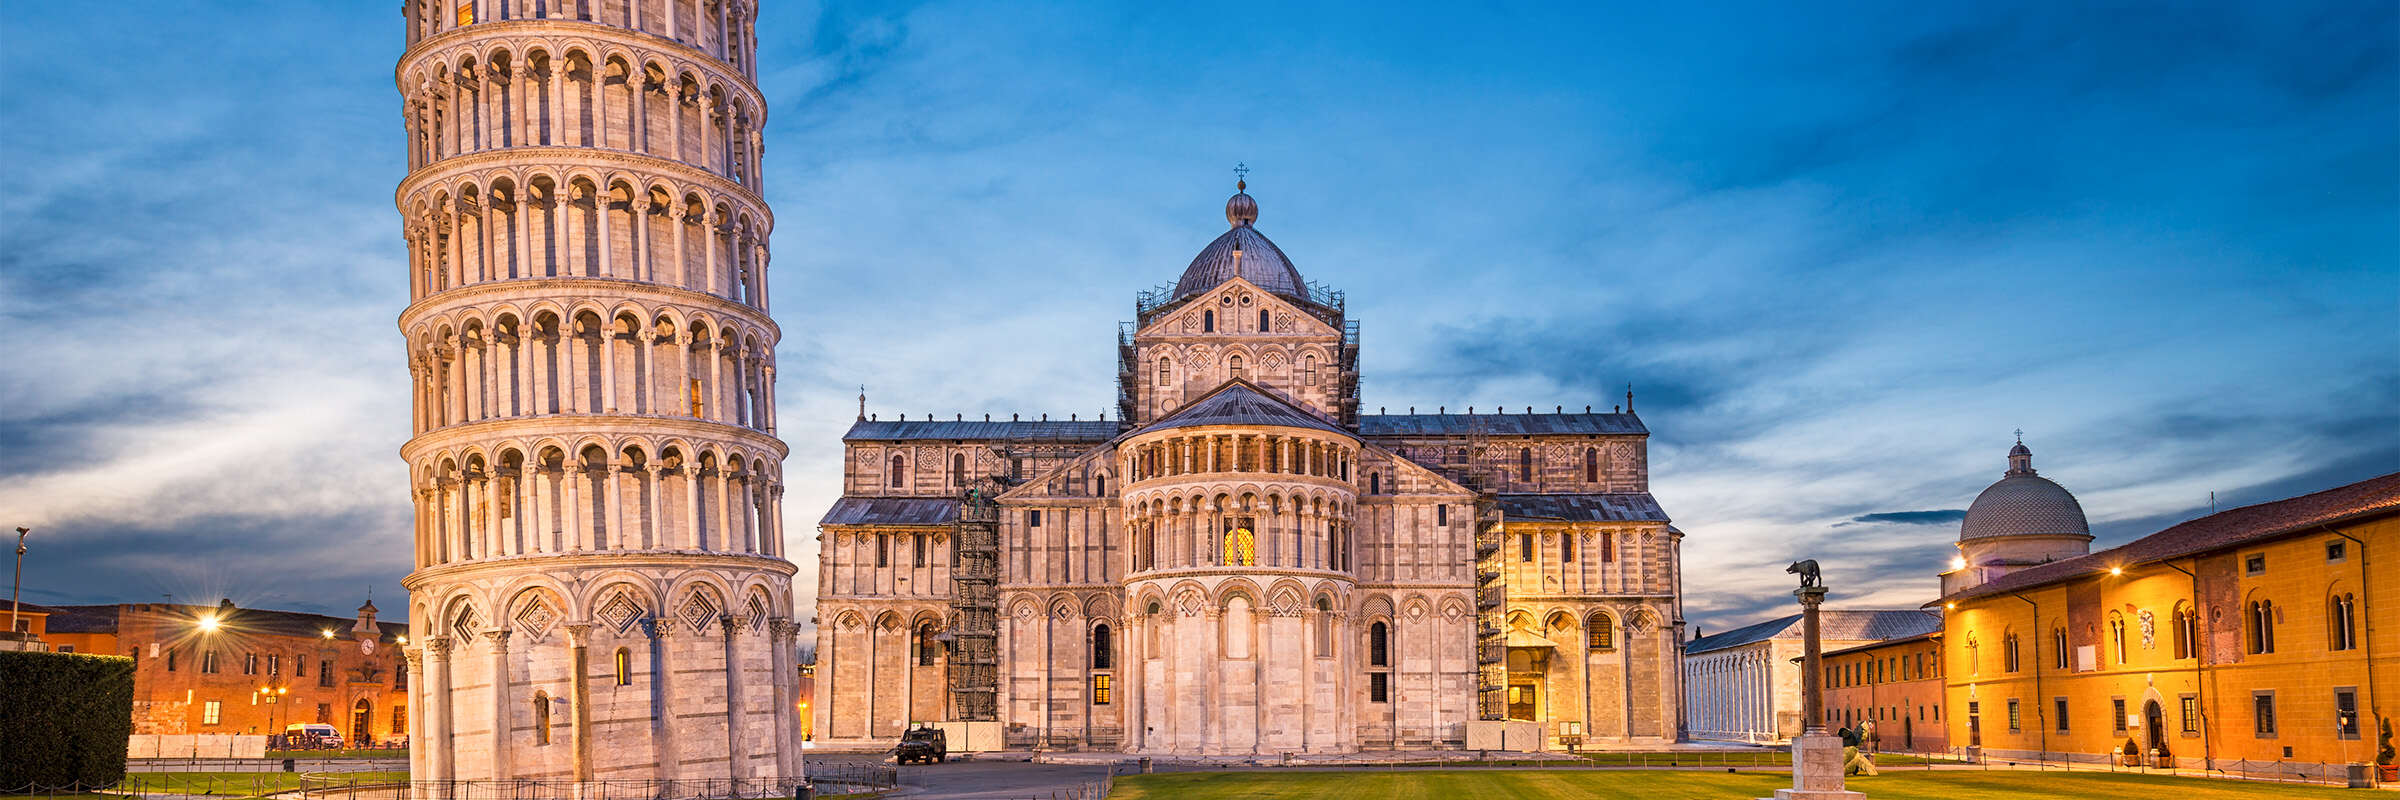 a-guide-to-pisa-italy-including-that-leaning-tower